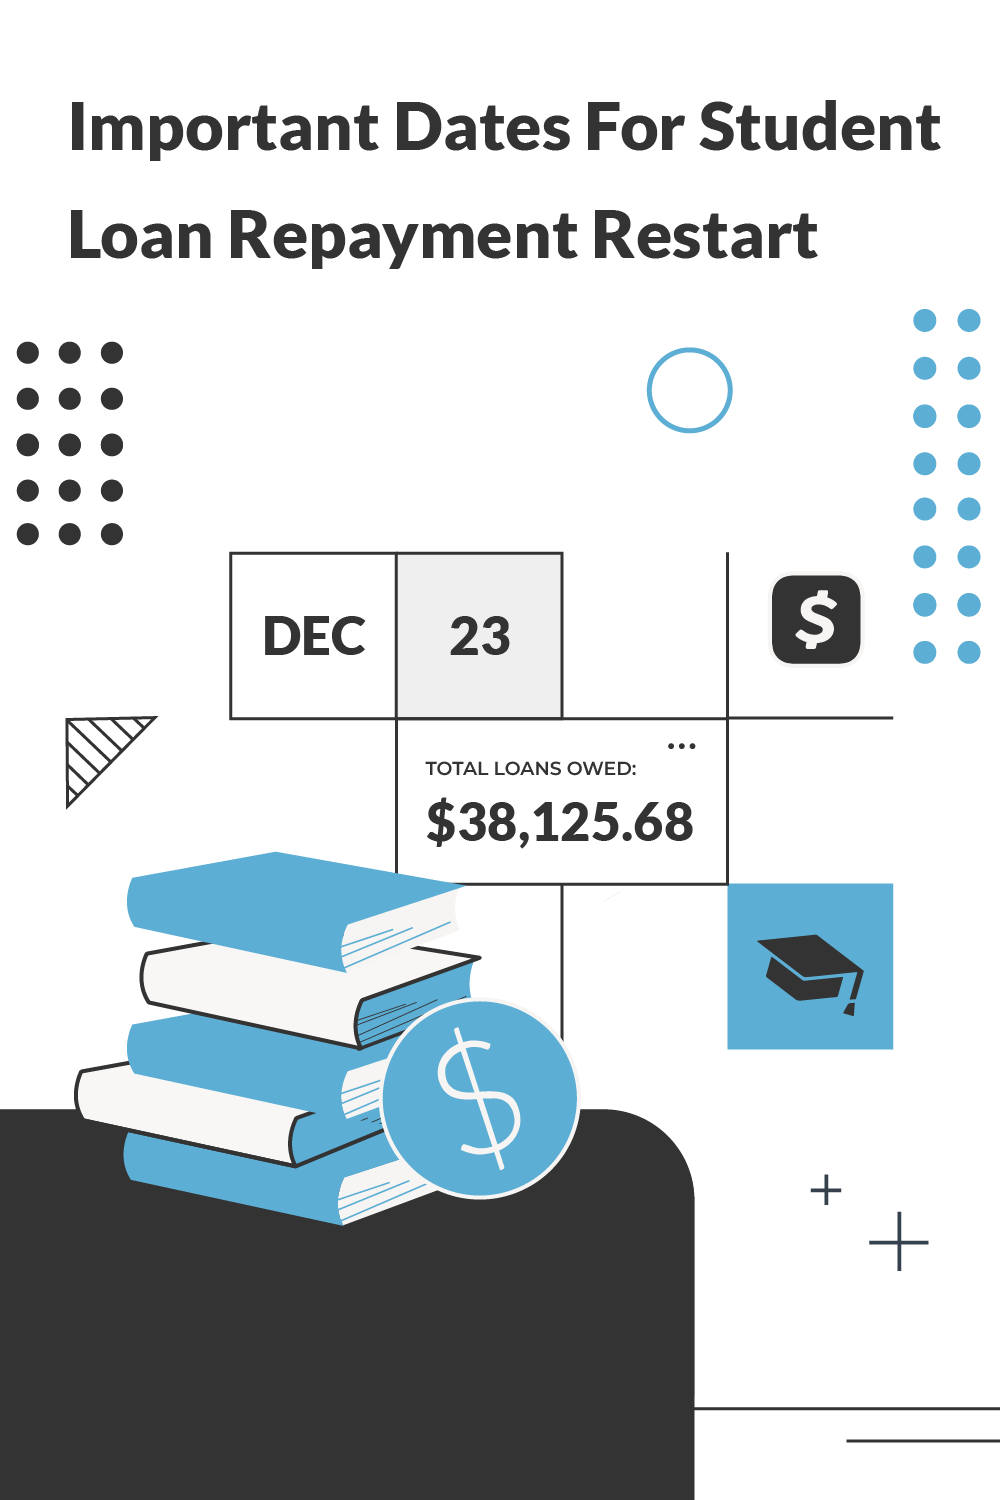 important dates for student loan repayment start pinterest image